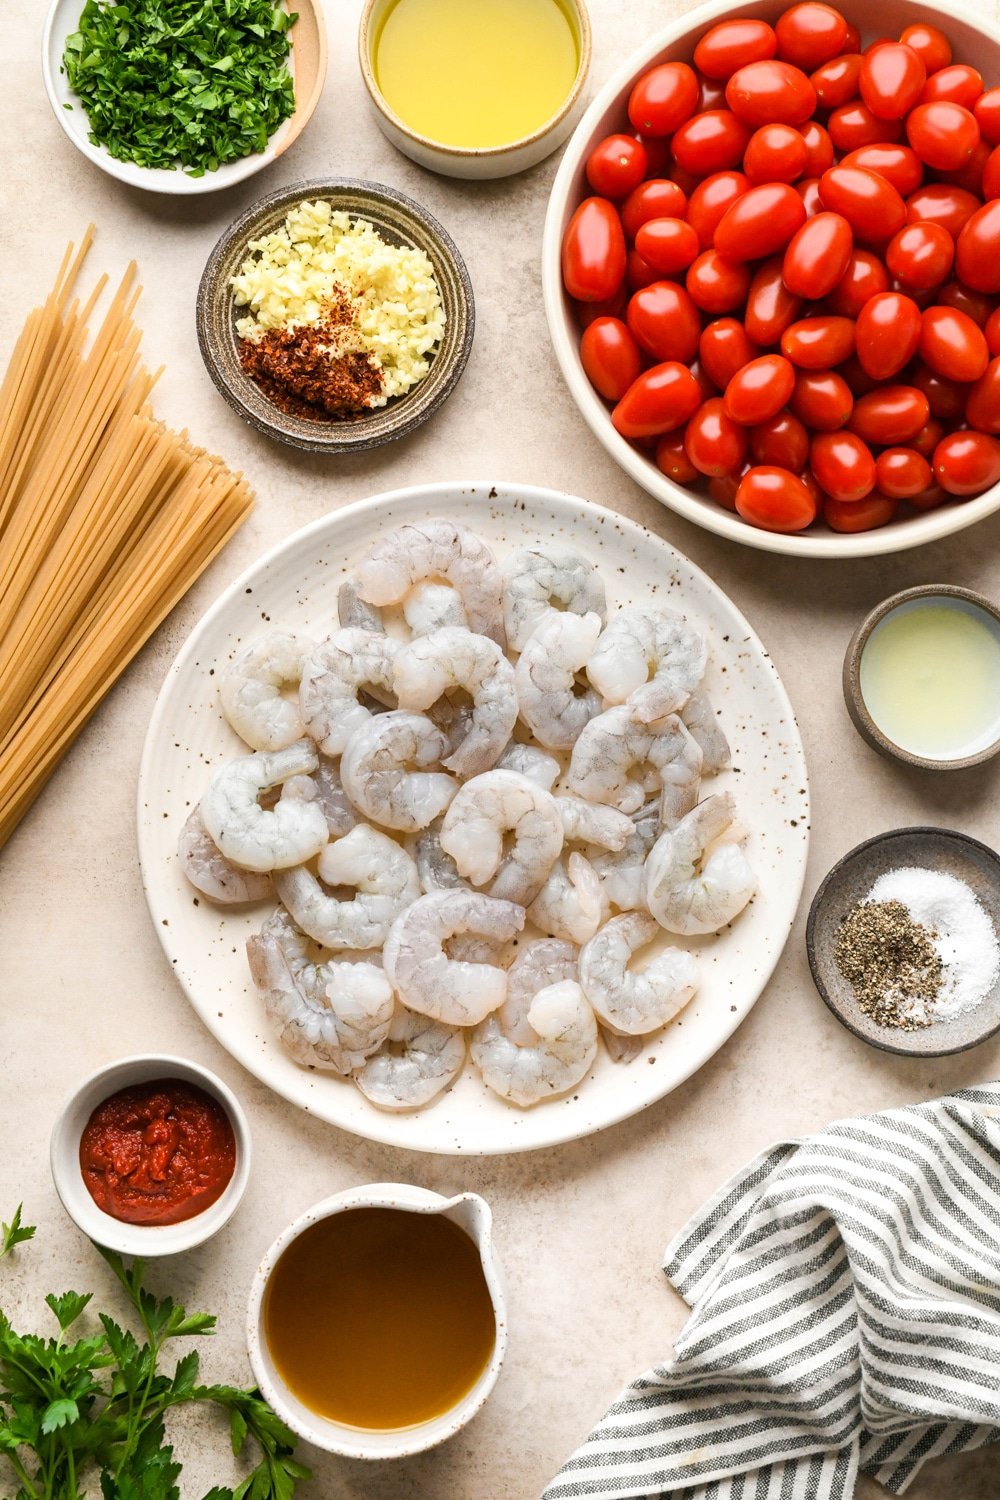 Ingredients for burst cherry tomato and shrimp pasta in various ceramics on a warm light brown background.